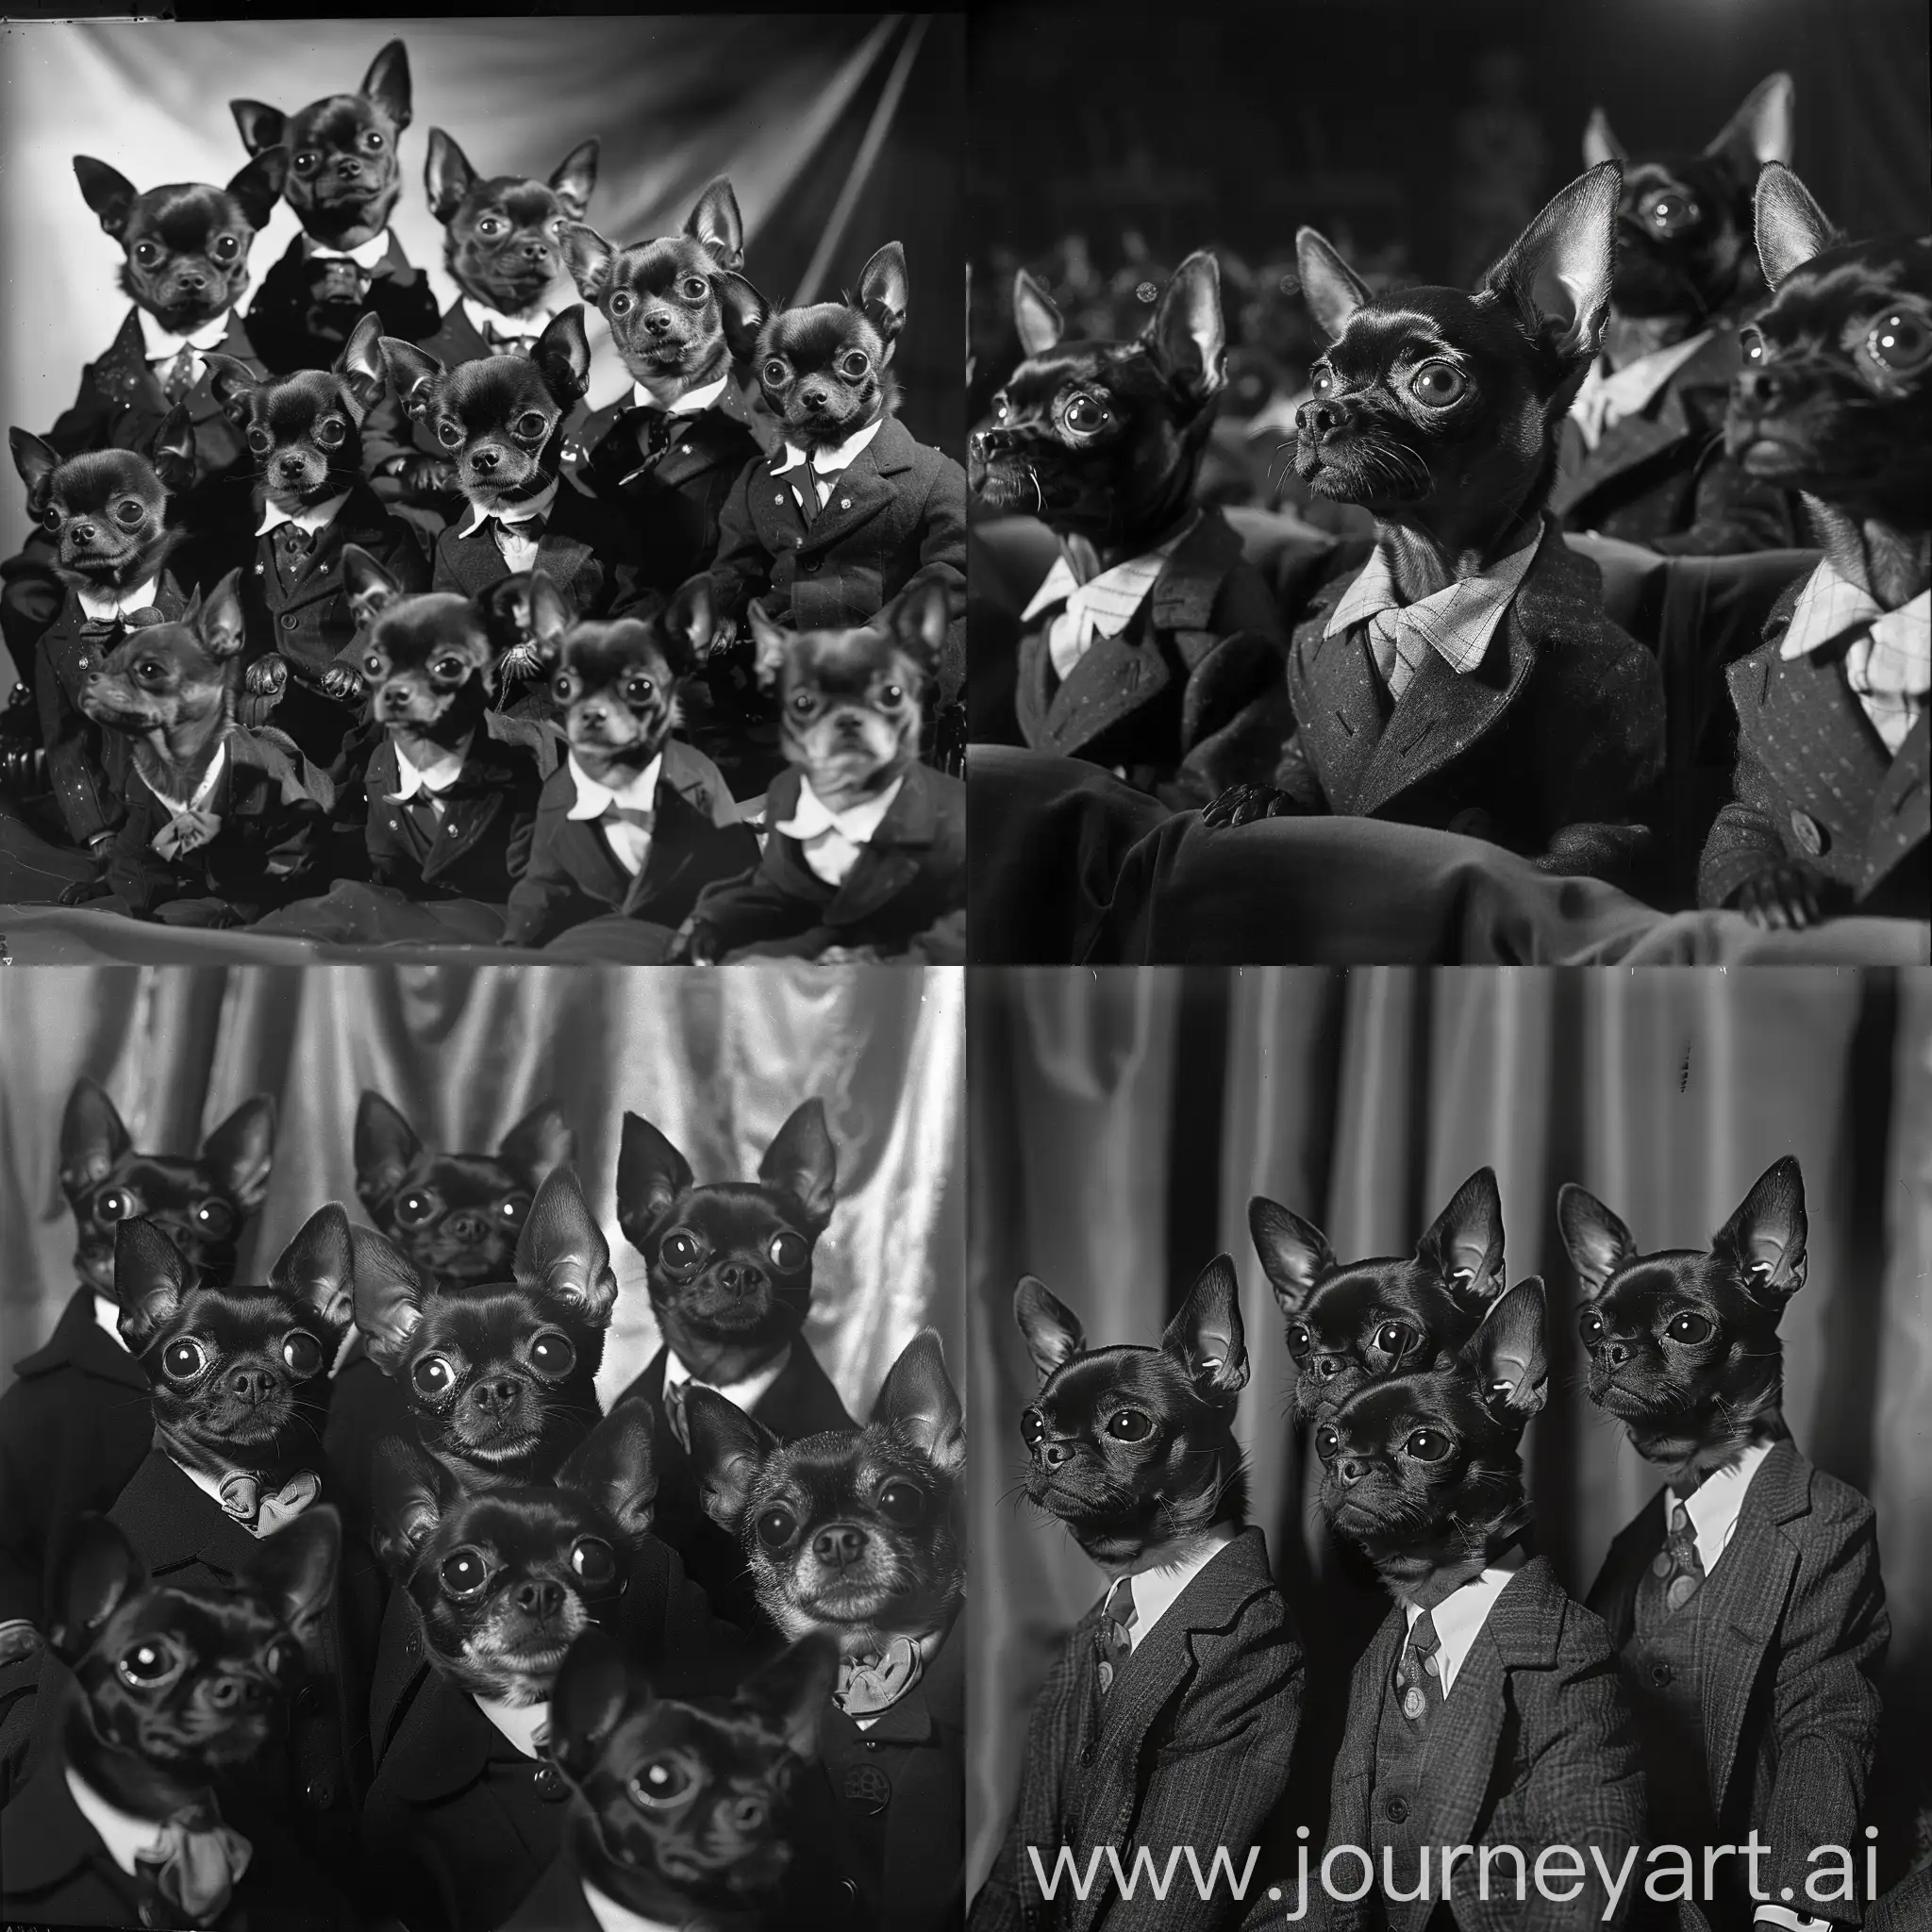 If Dion and the Belmonts existed on a planet of black Chihuahuas and they were dressed in suits and captured on black and white photo during a performance